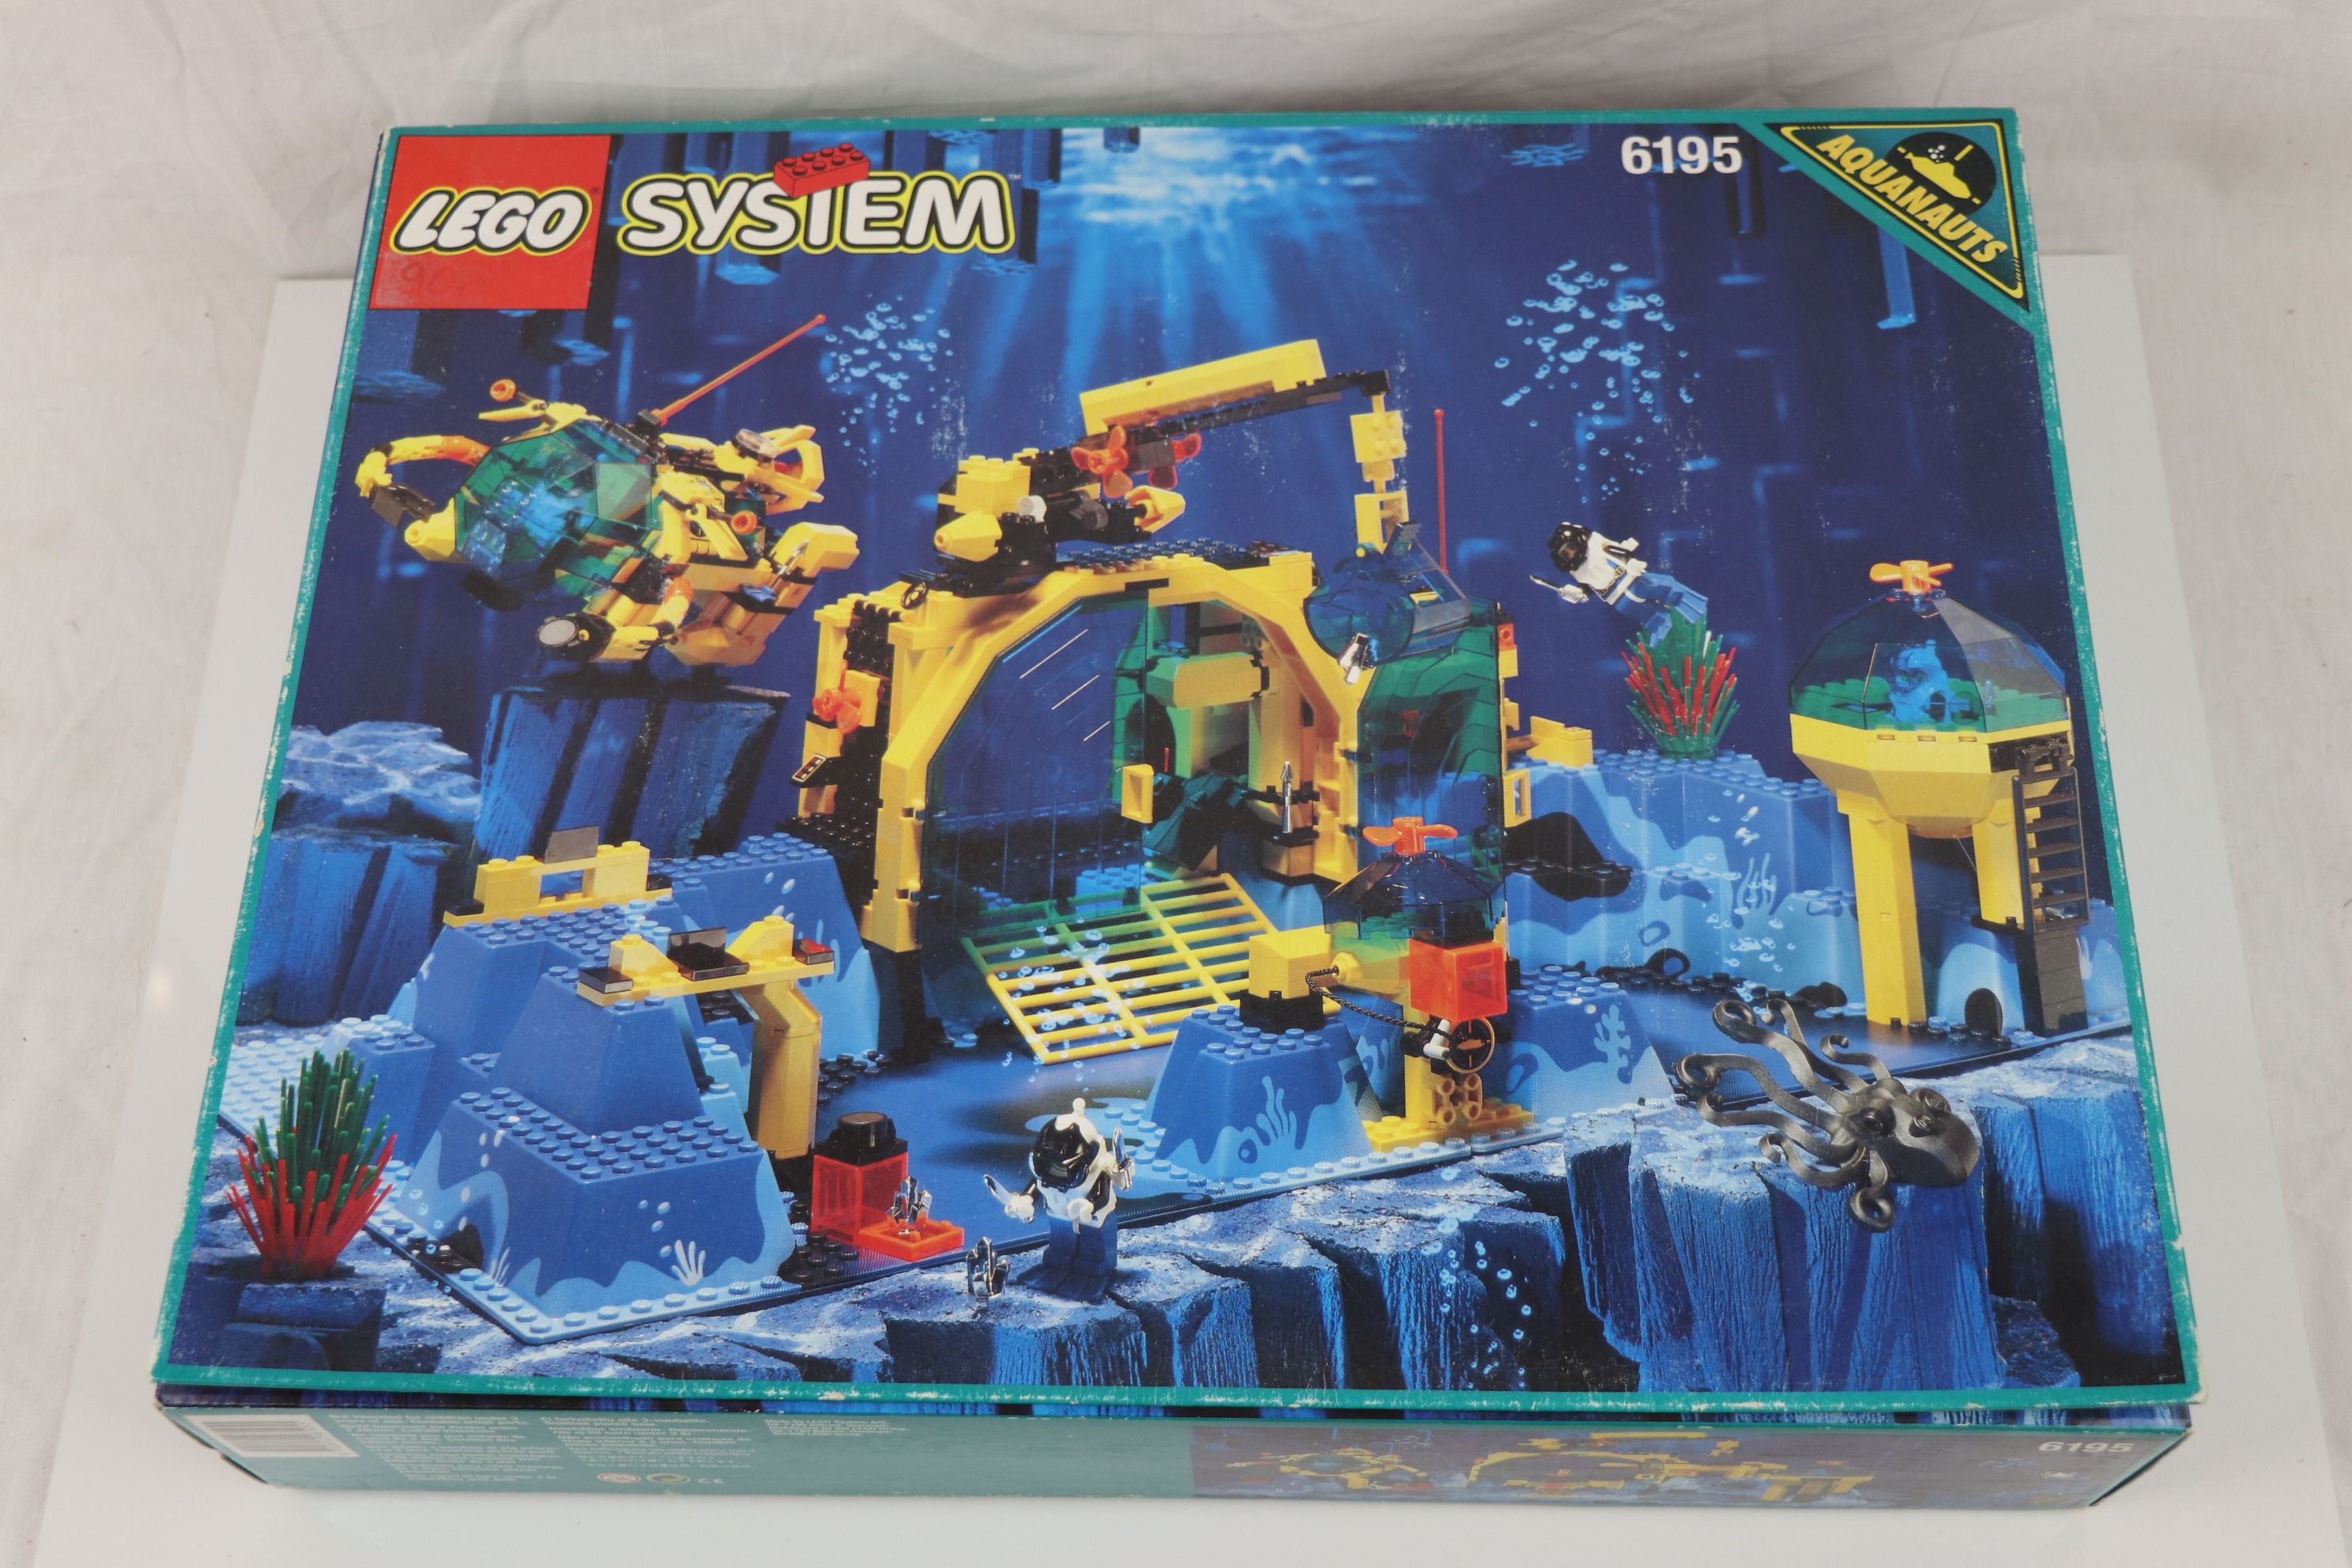 Lego - Boxed Lego System 6195 Aquanauts Neptune Discovery set unchecked but appearing complete - Image 3 of 16